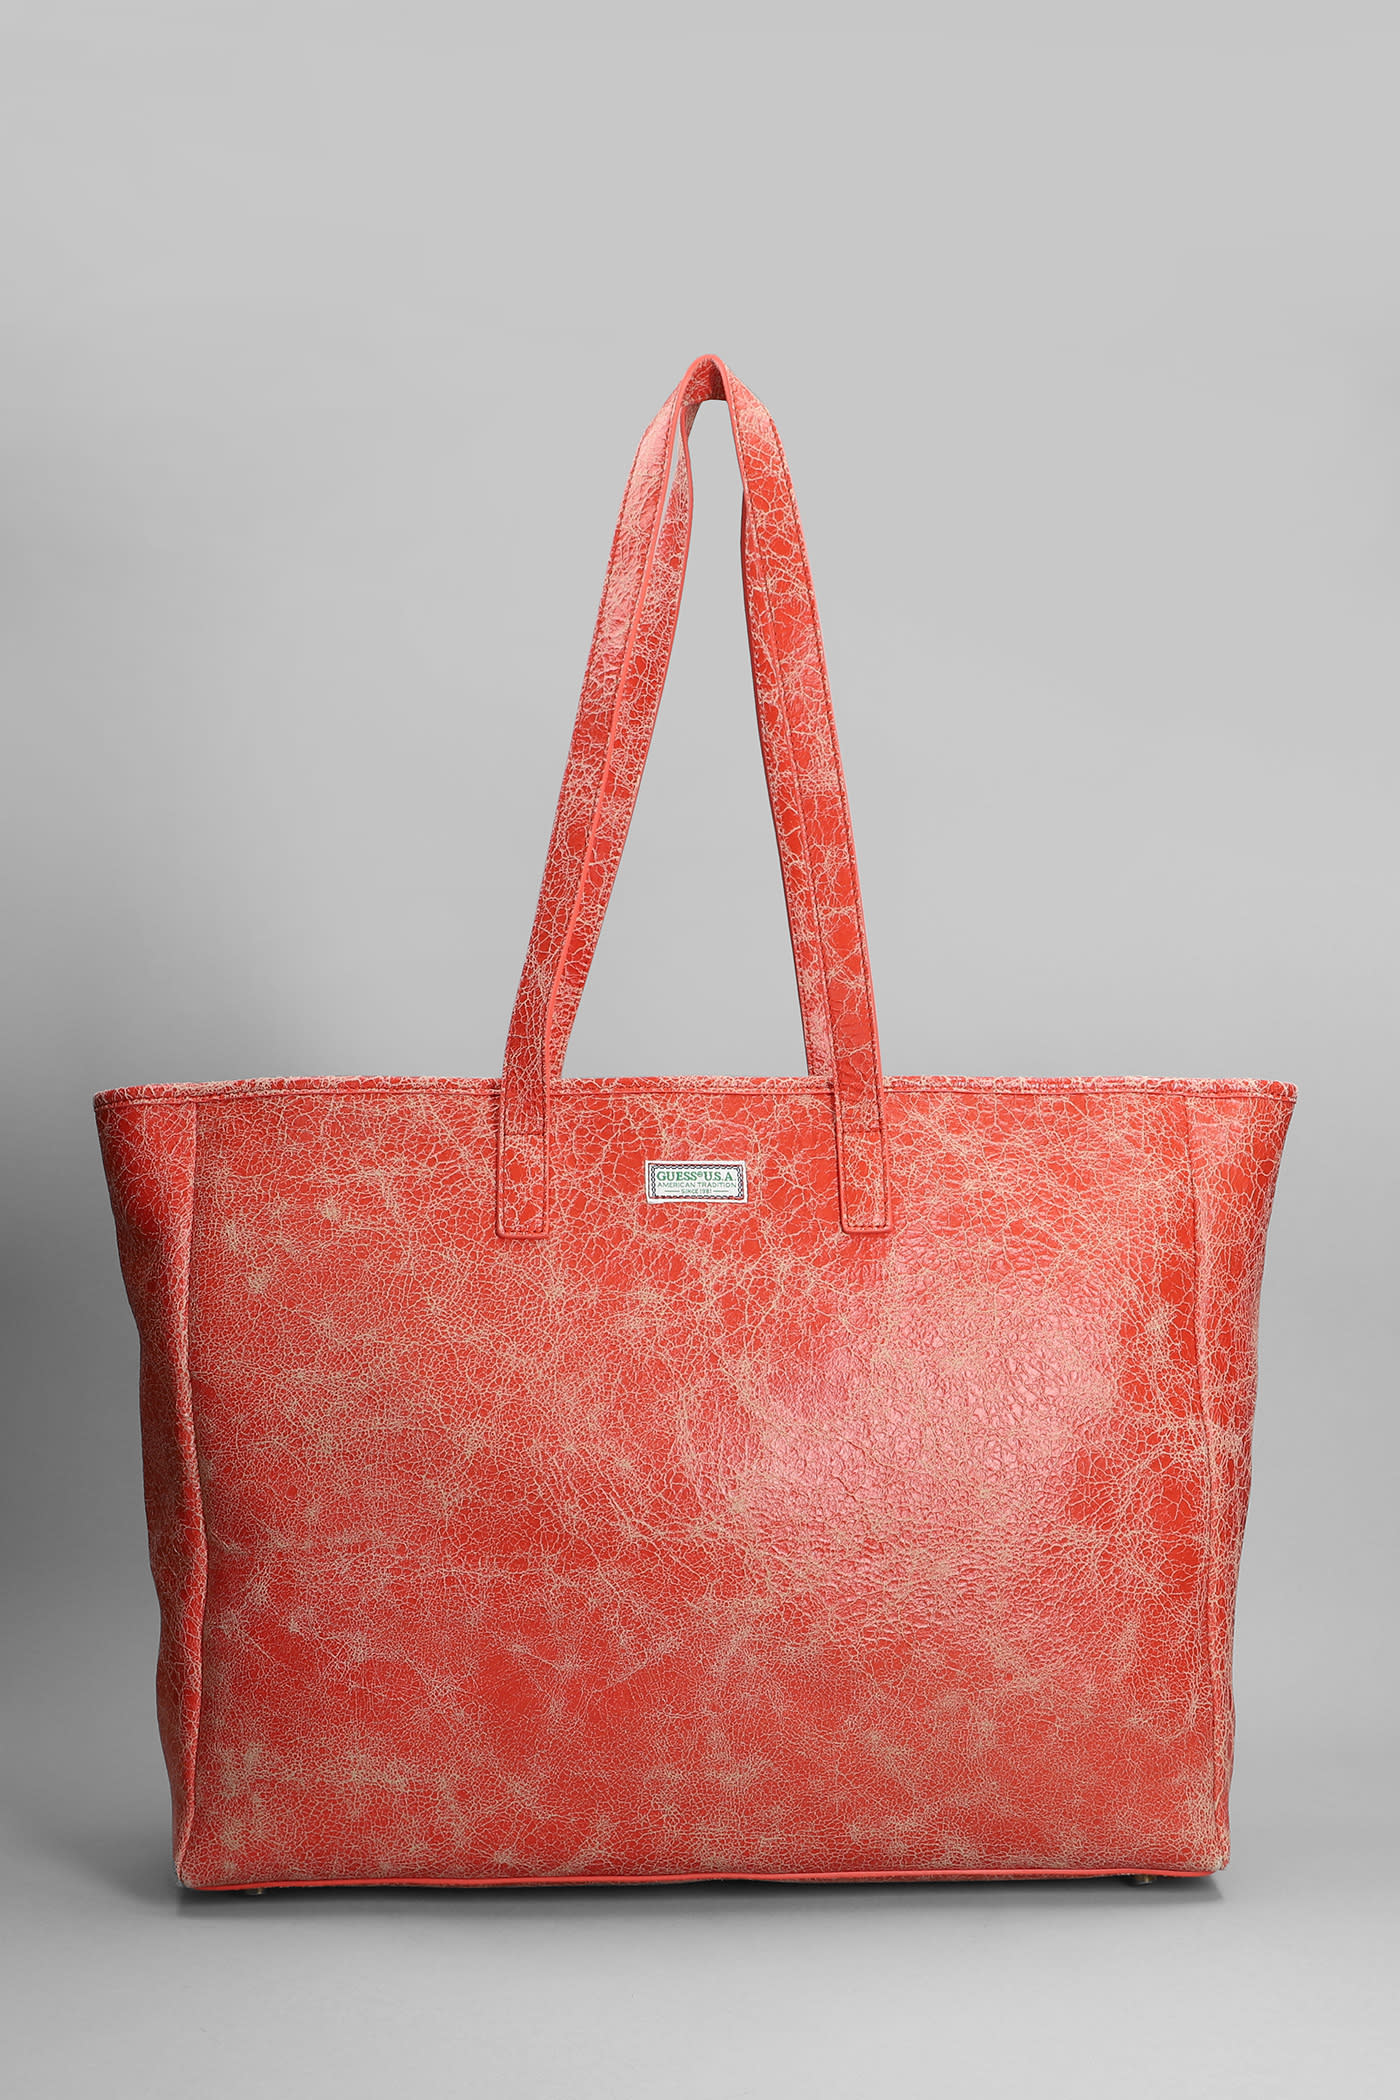 Guess Tote In Red Leather